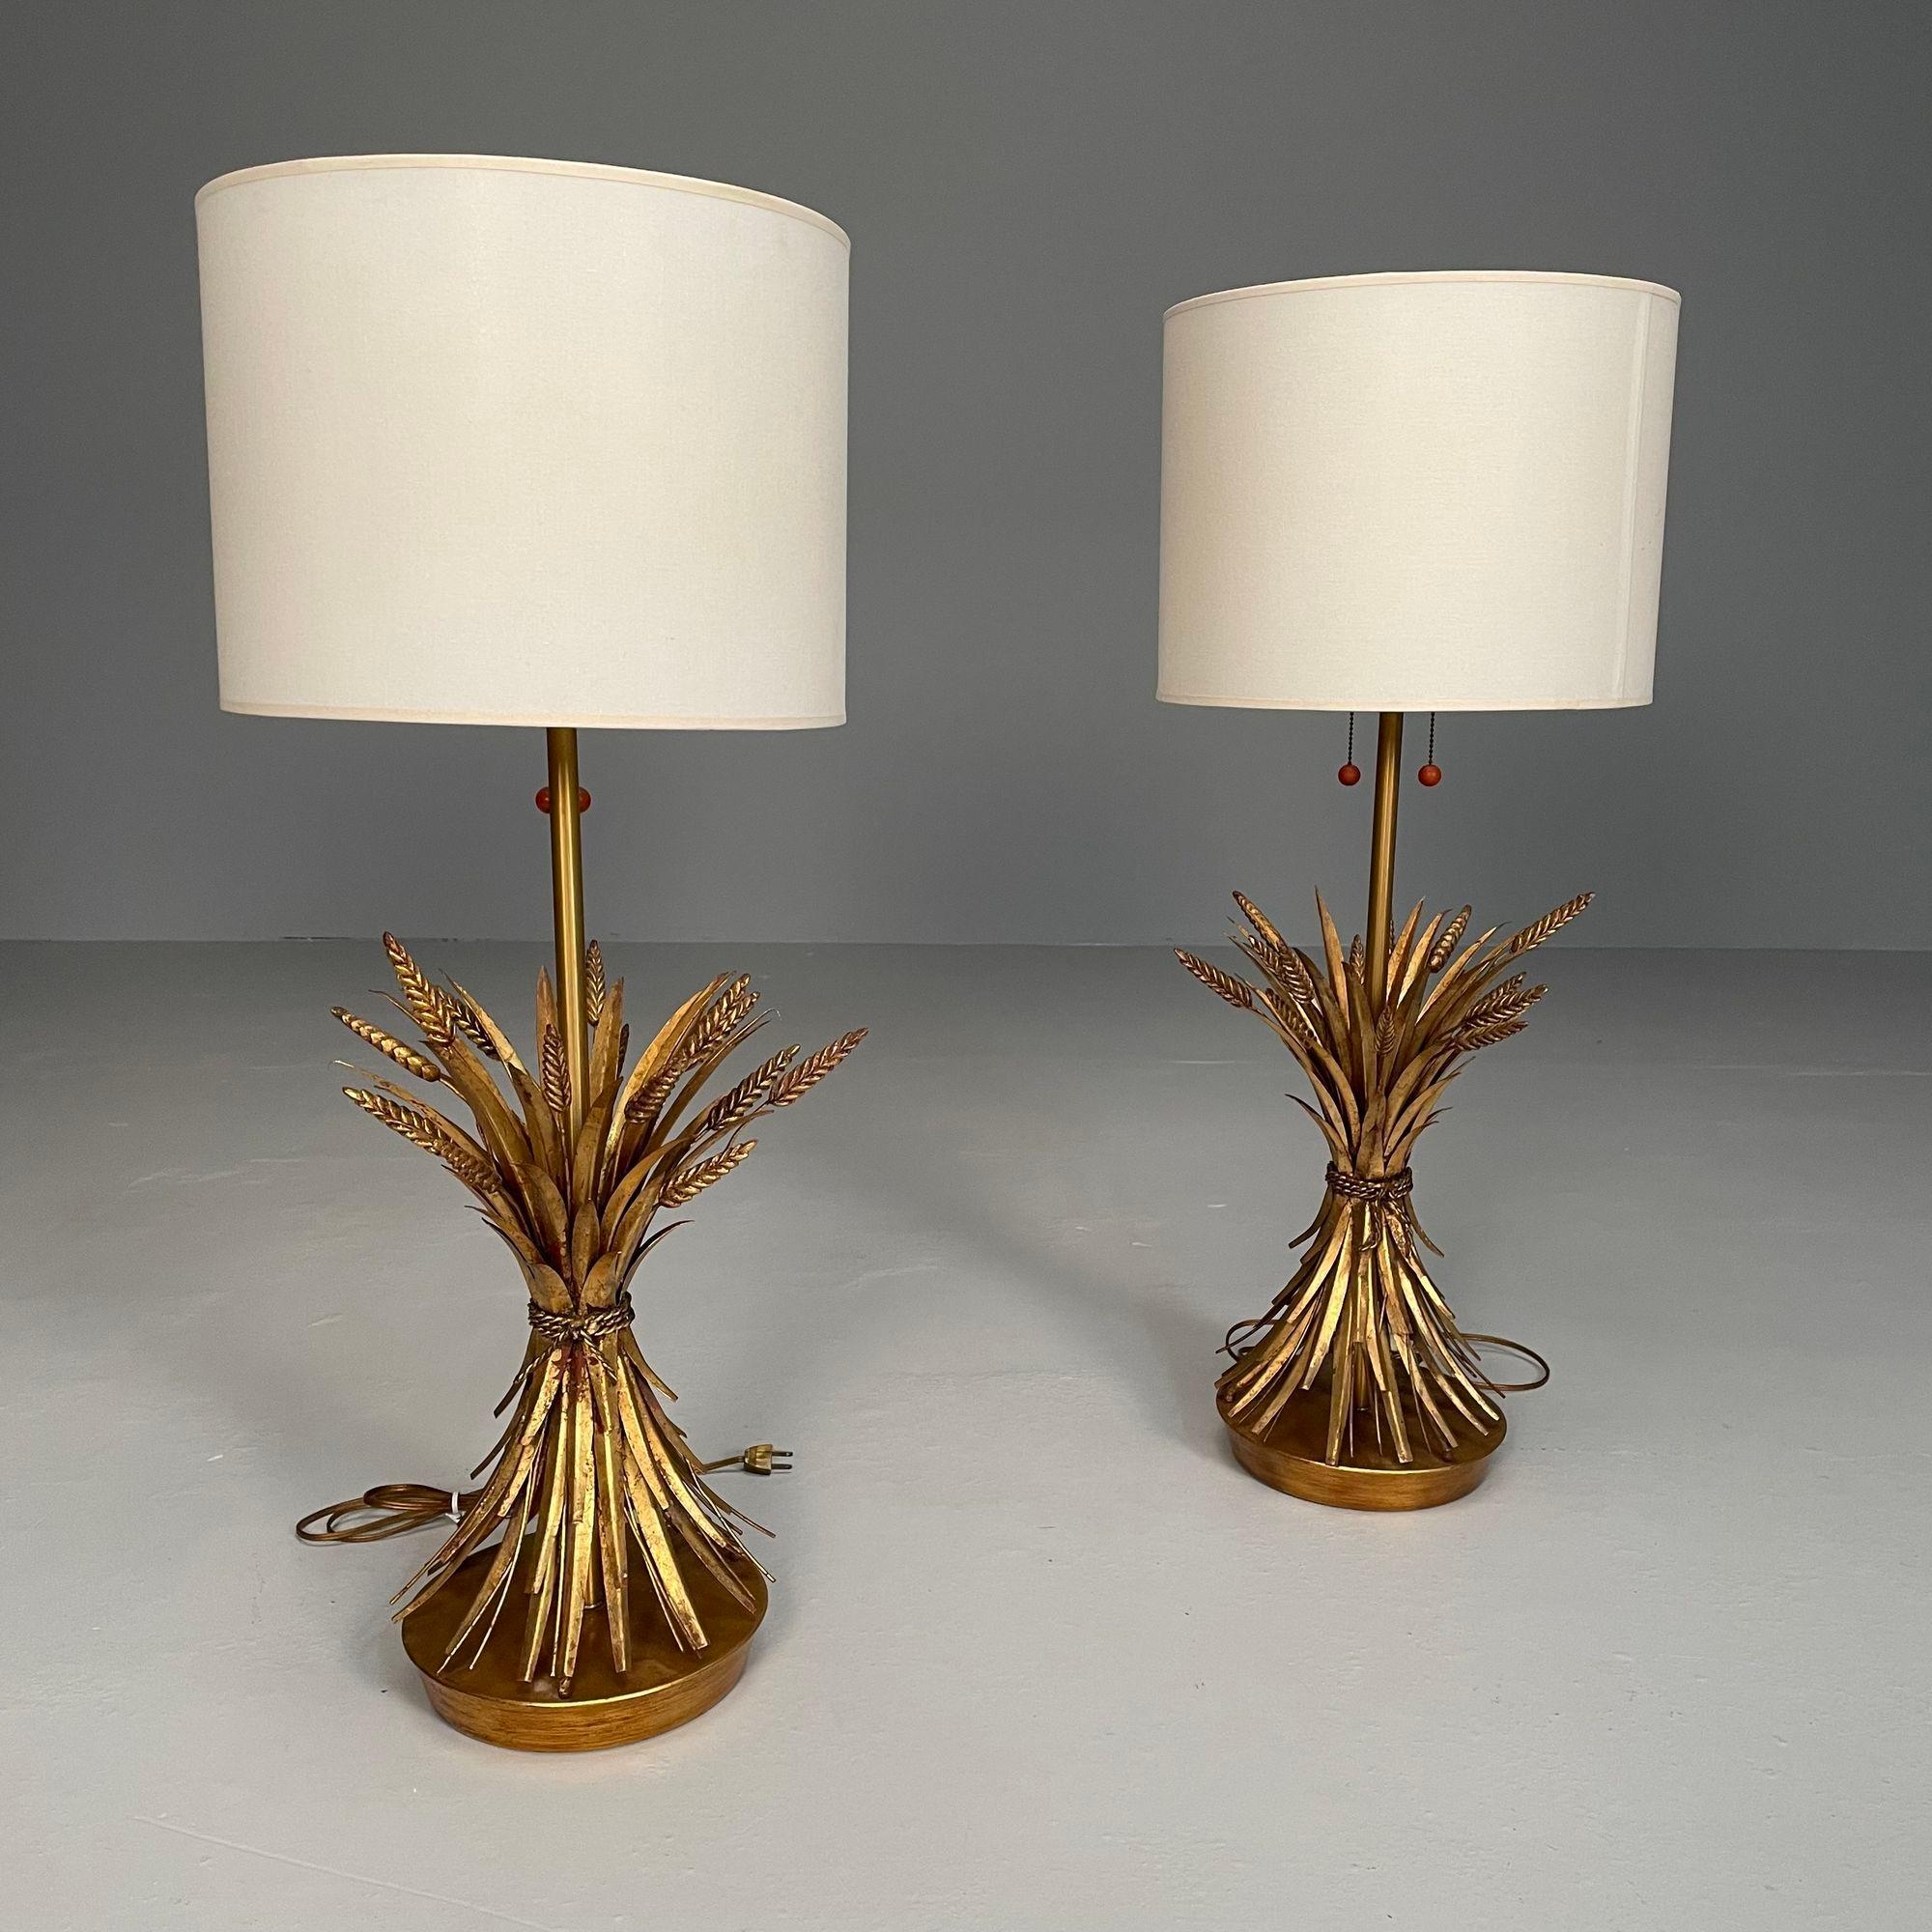 Pair of Hollywood Regency Style Wheat Sheath Table / Desk Lamps, Gilt

A fine pair of wheat table or desk lamps by Marbro Lamp Company. Wheat frame of lamp is 22 inches. Lamps come without shades.

Gilt Metal
United States, c. 1980s
By The Marbro